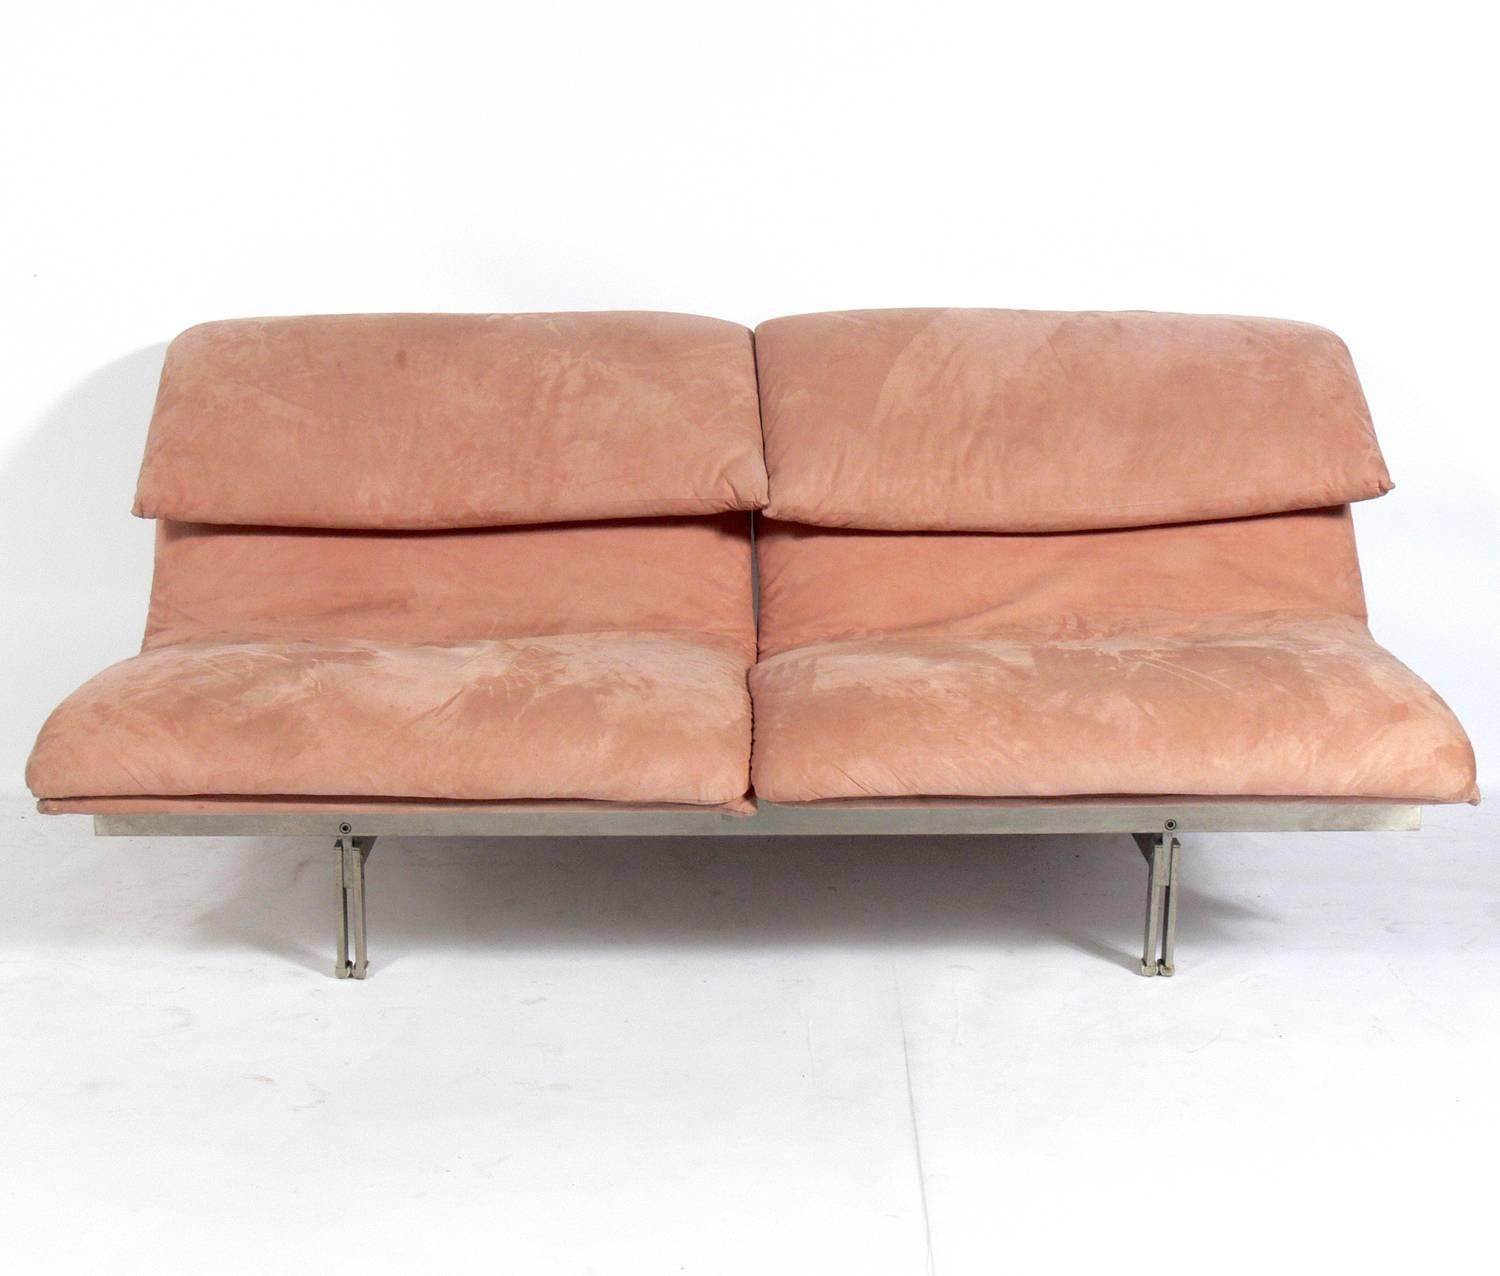 Pair of curvaceous Italian sofas or settees by Saporiti, Italy, circa 1980s. They seat two to four people each, depending on the size and friendliness of those seated. The dusky pink suede upholstery probably needs to be replaced unless you really